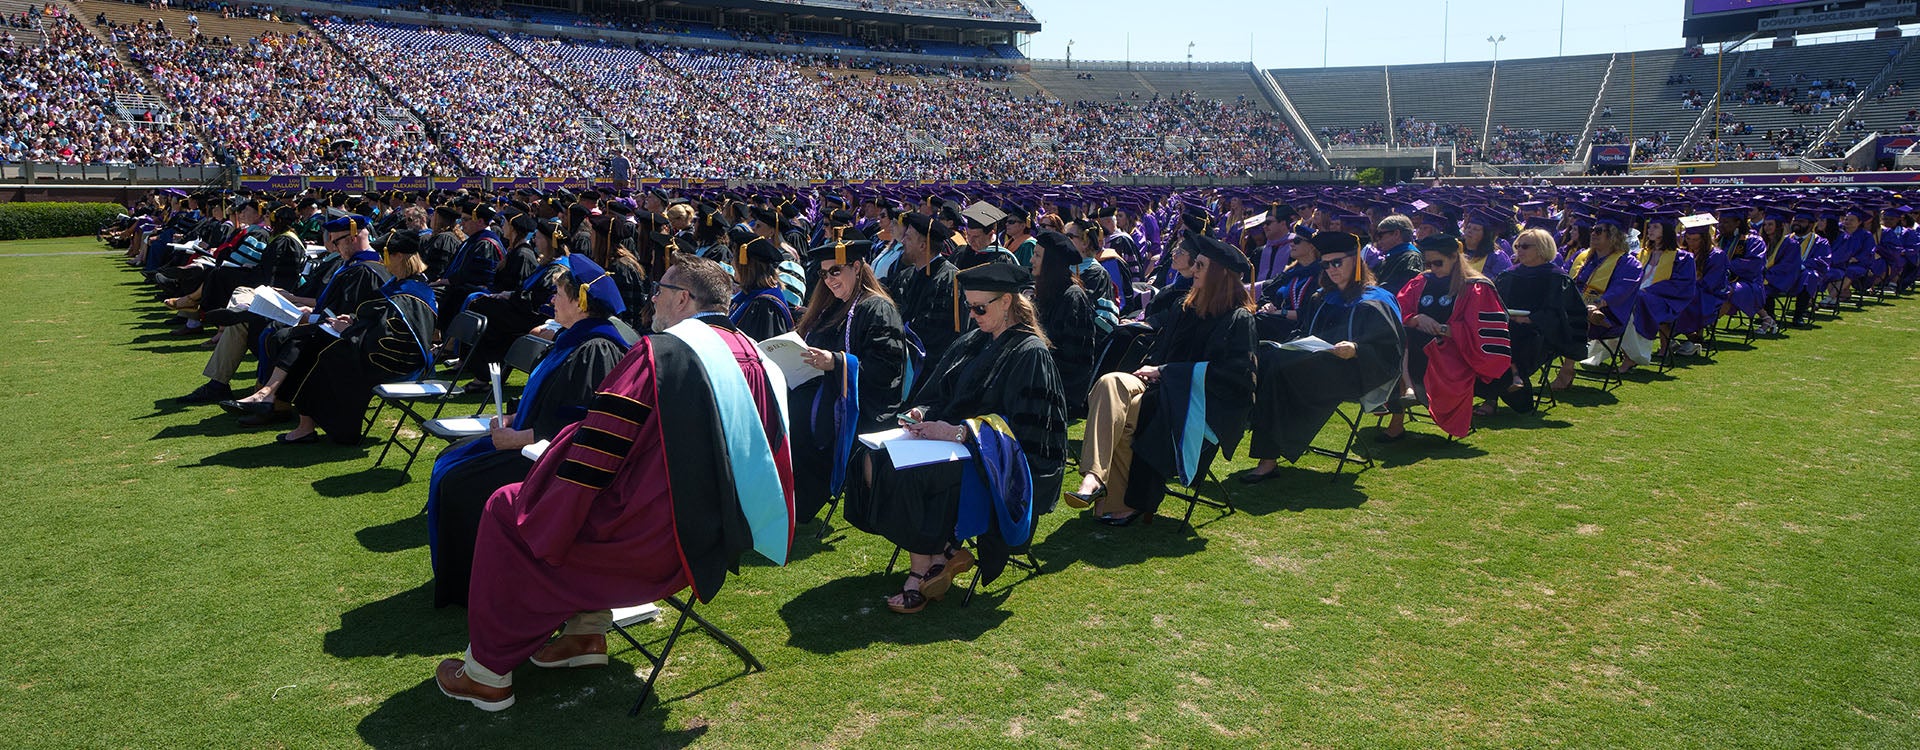 “You graduate at a moment in time when you are desperately needed, when your skills, your talents, your knowledge and your leadership are required in order for this world to thrive,” Chancellor Philip Rogers told the graduates.